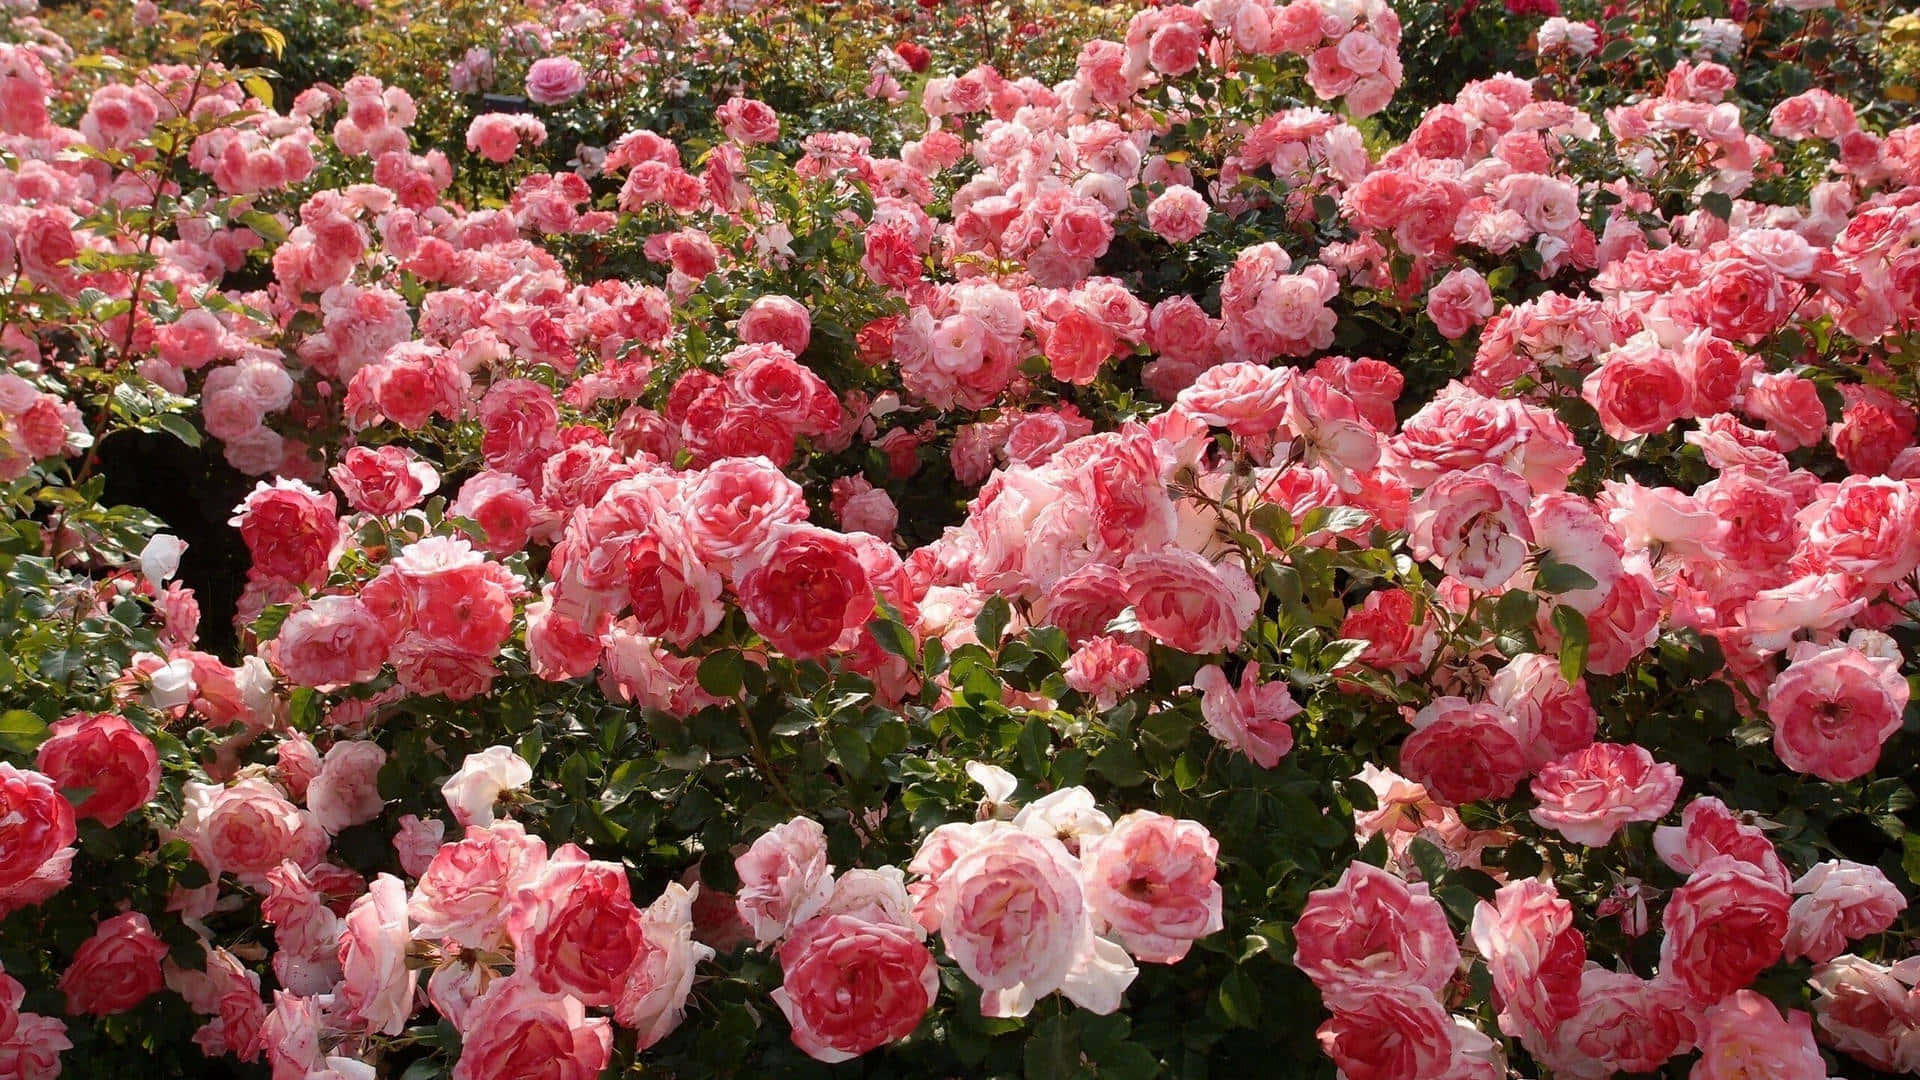 Brighten Your Day With the Joy of Roses